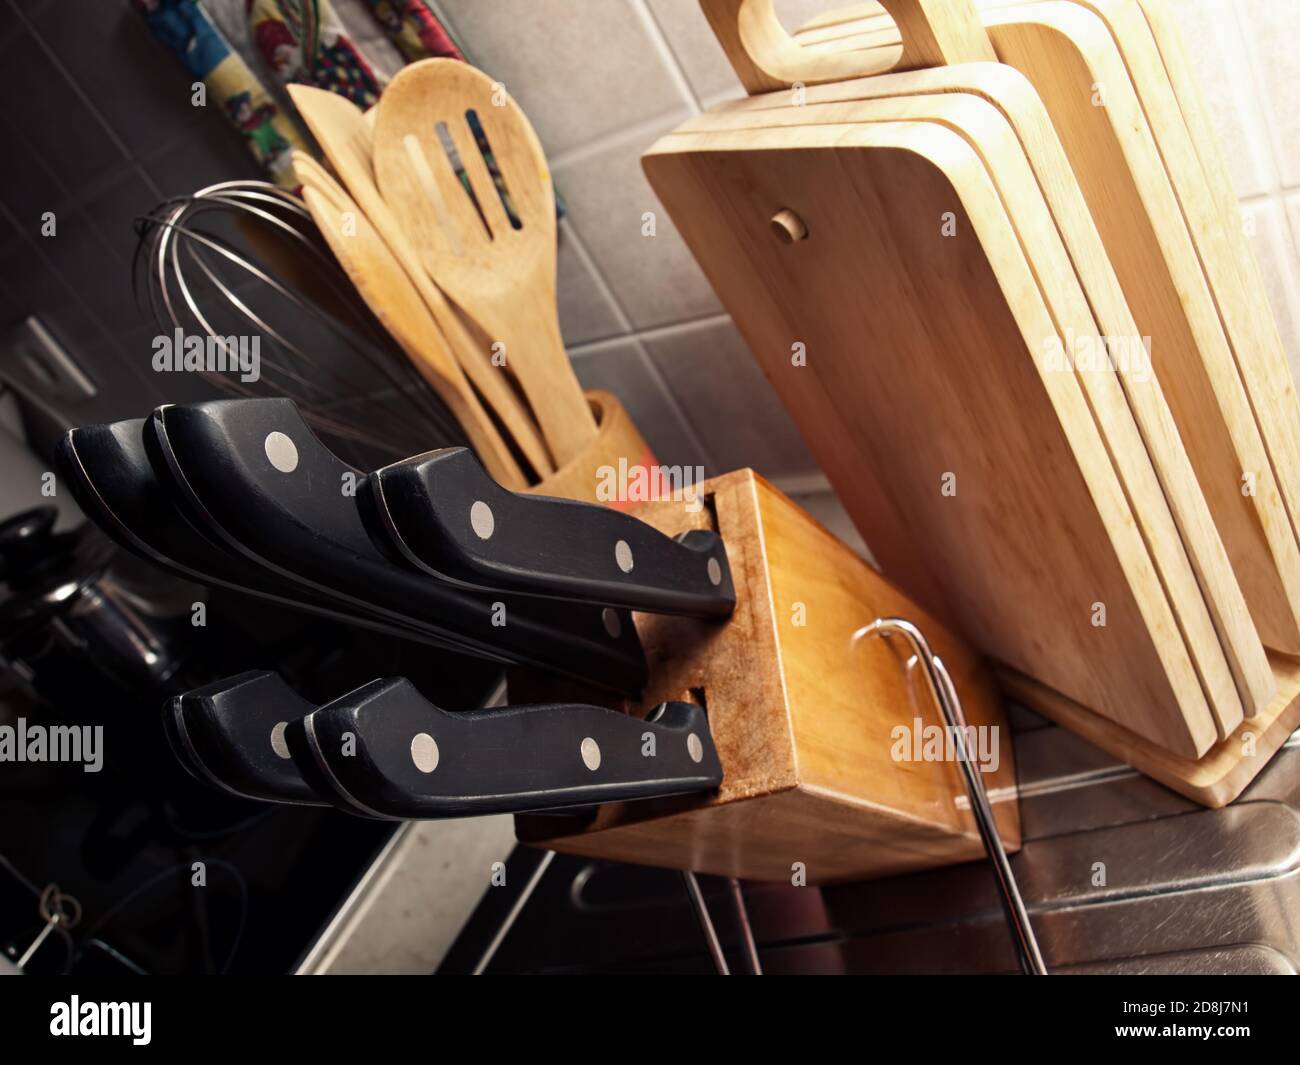 Detail from the home kitchen with a set of knives in the foreground. Stock Photo